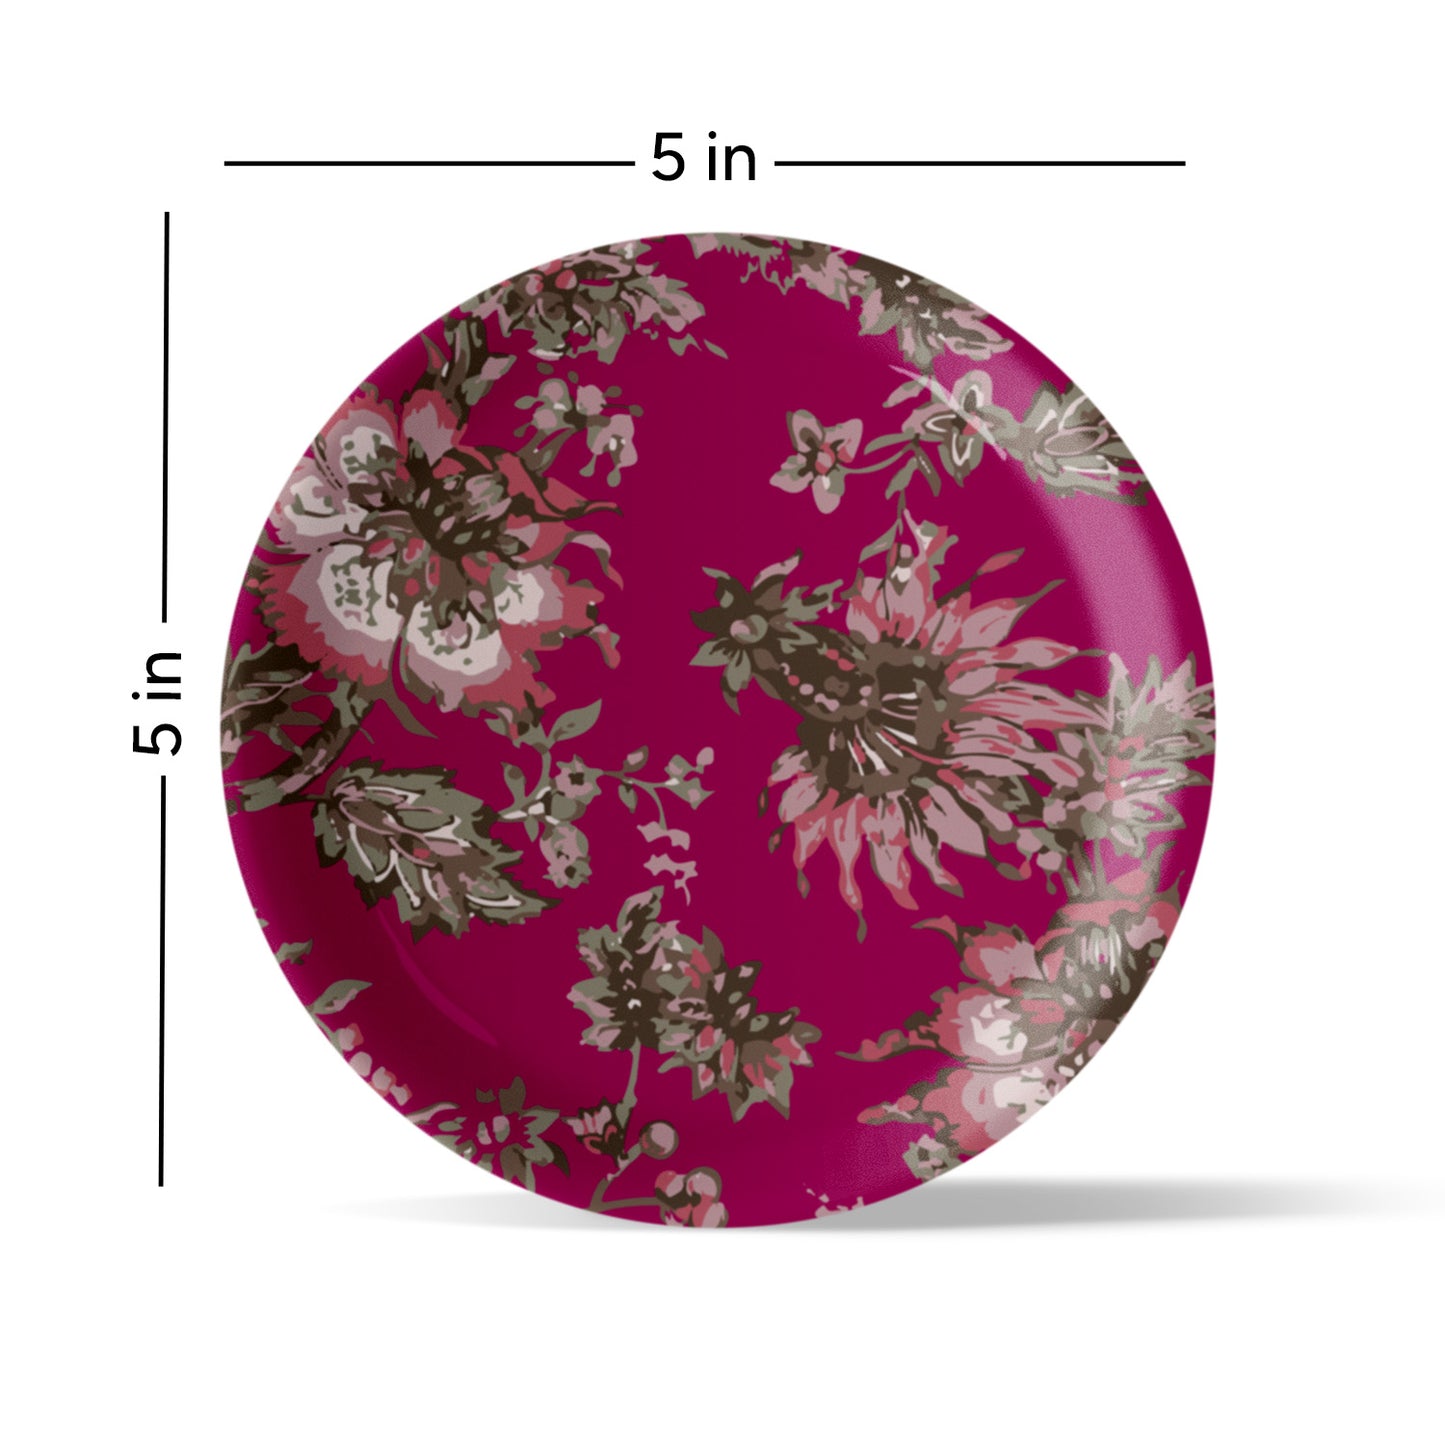 Ethnic Floral Wall Plates Sets of 4